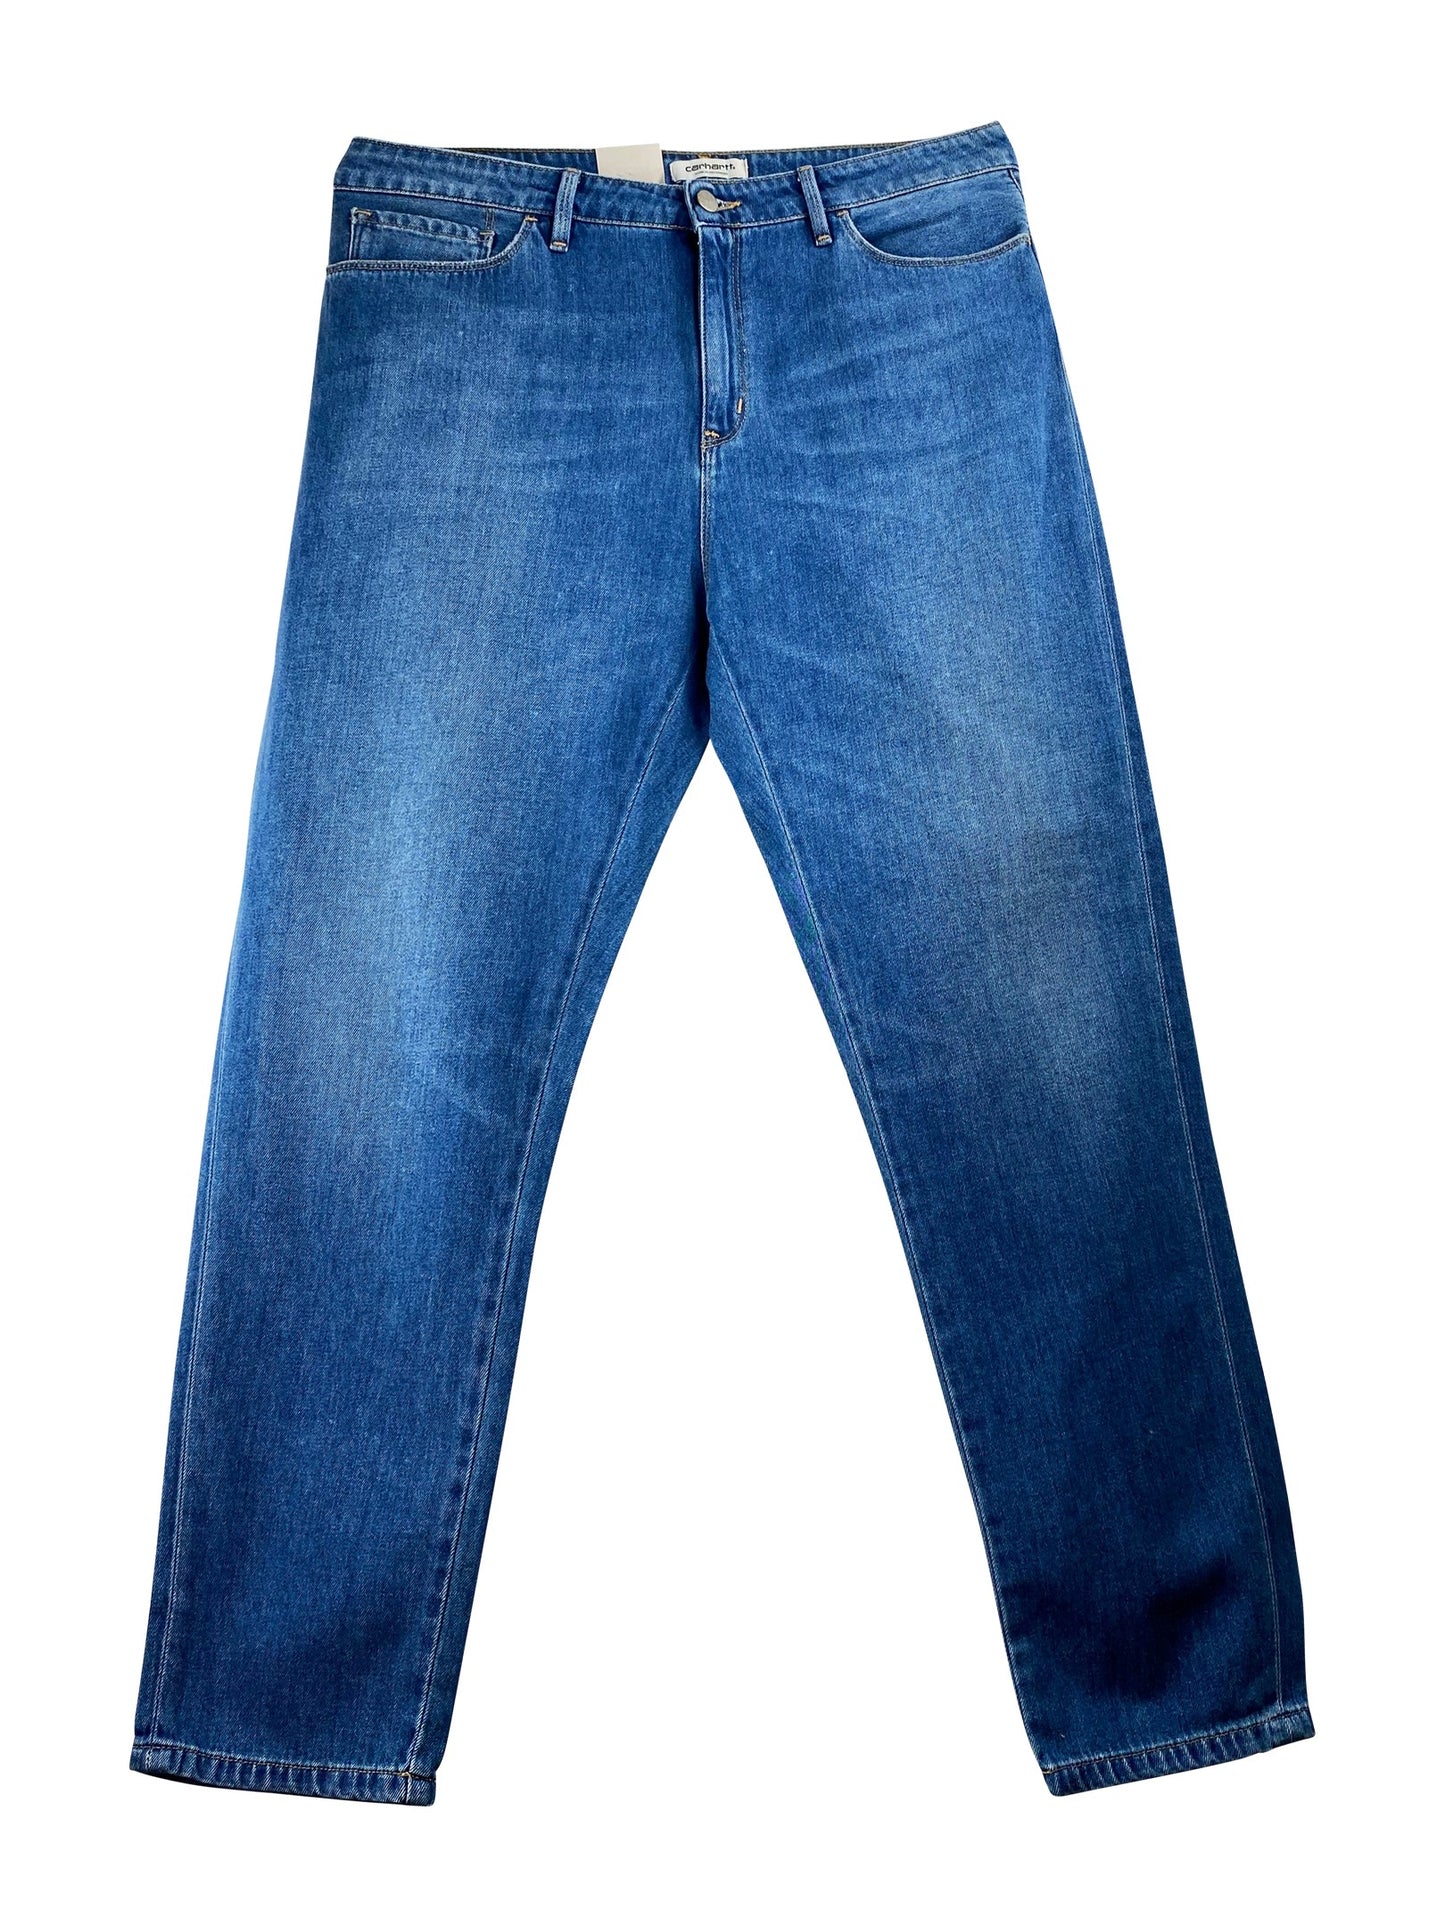 Carhartt Jeans “ W´Domino Ankle Pant” -blue prime stone